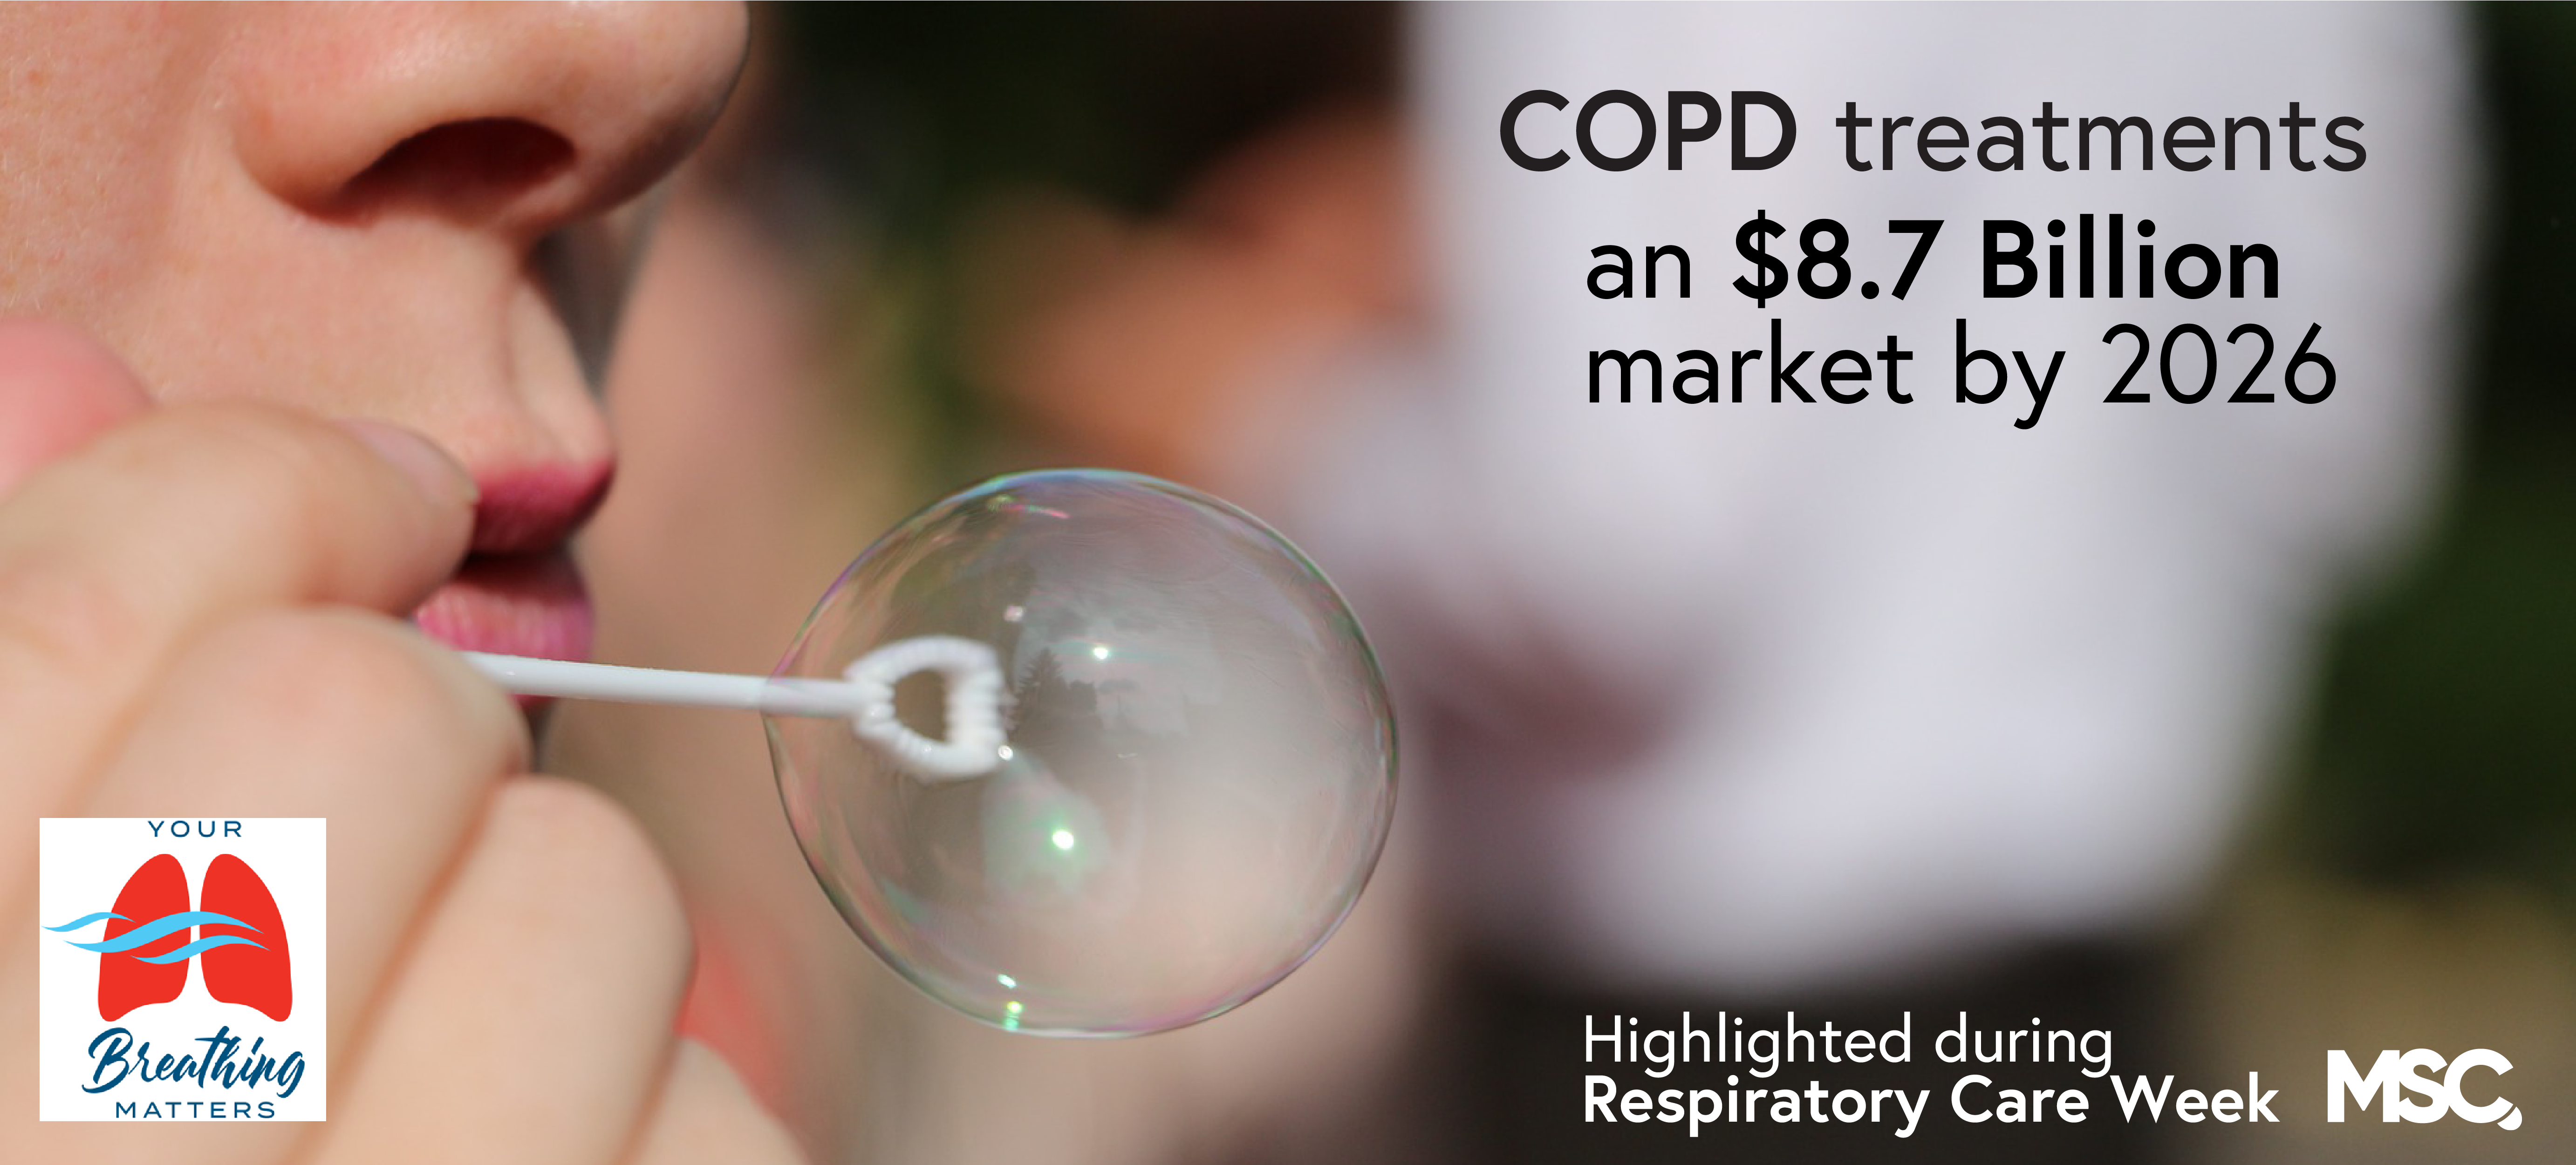 Respiratory Care Week: Shedding light on one of the world’s largest killers, COPD